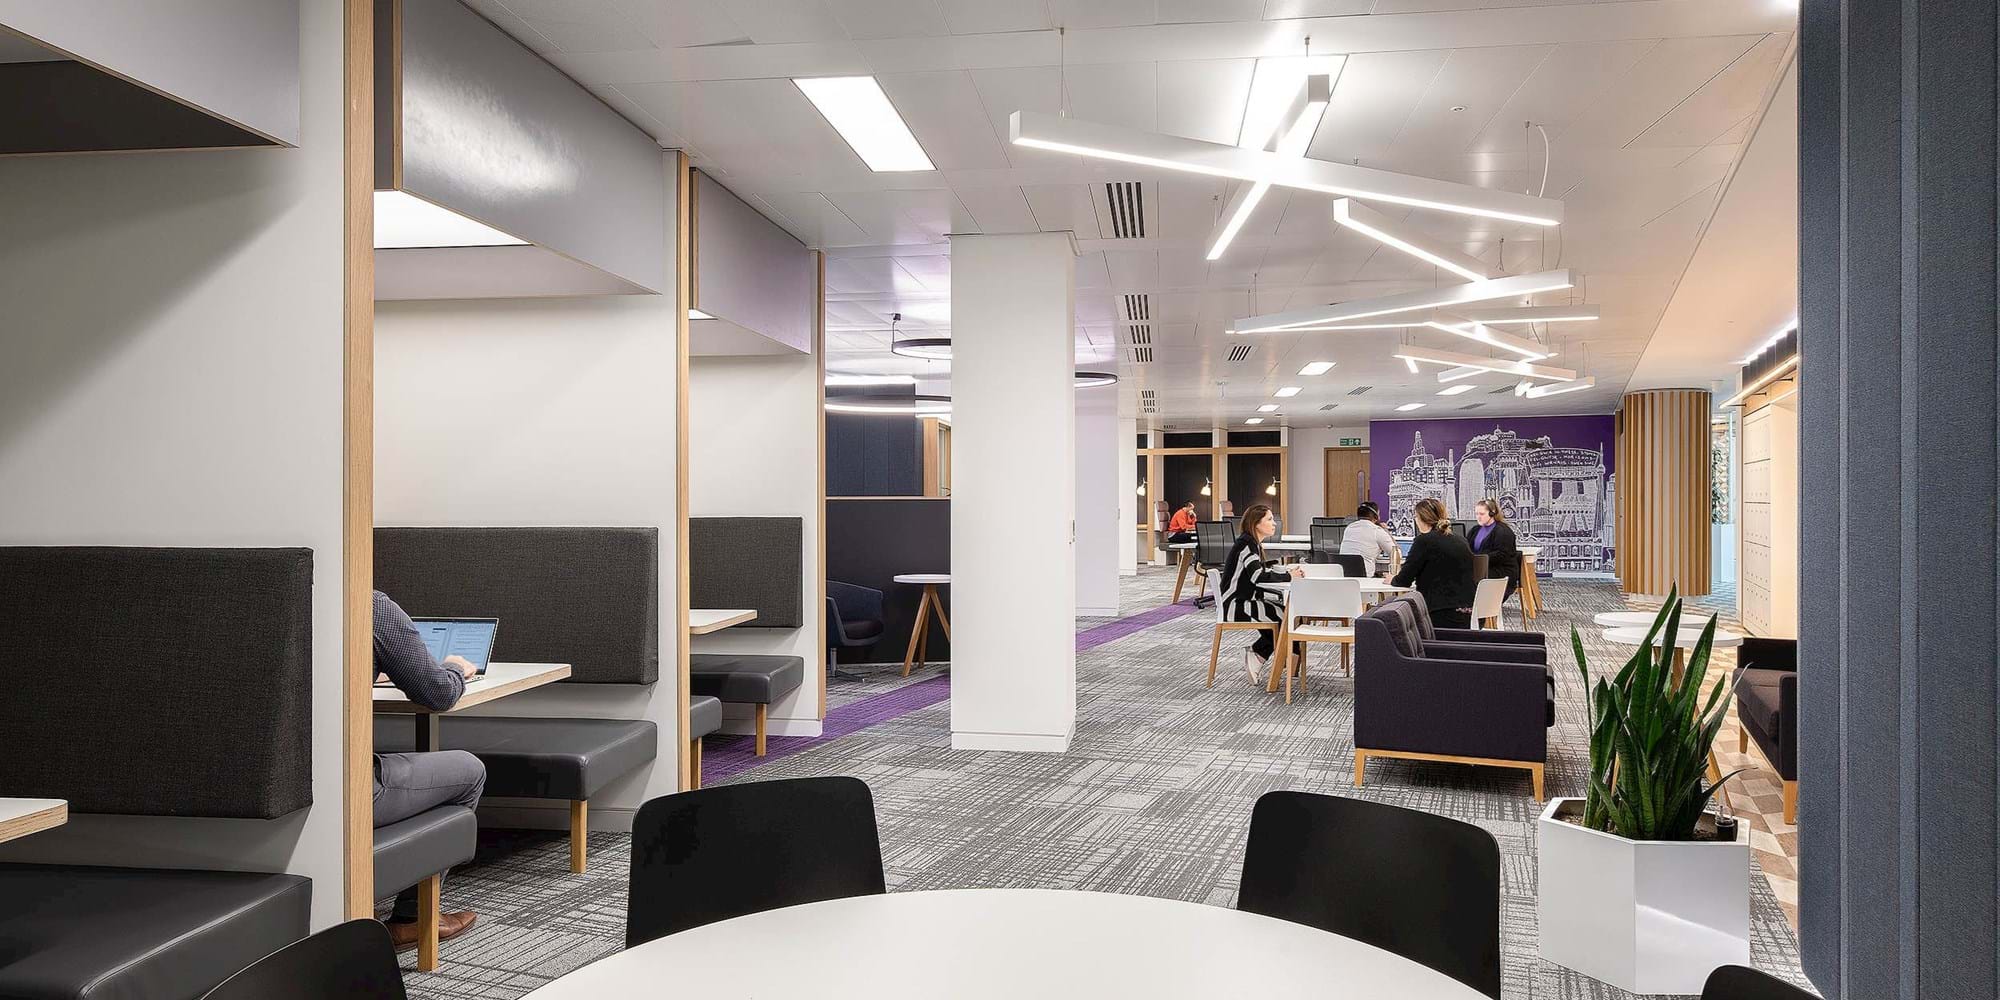 Modus Workspace office design, fit out and refurbishment - RICS Birmingham - RICS 09 brighter and warmer - Website.jpg